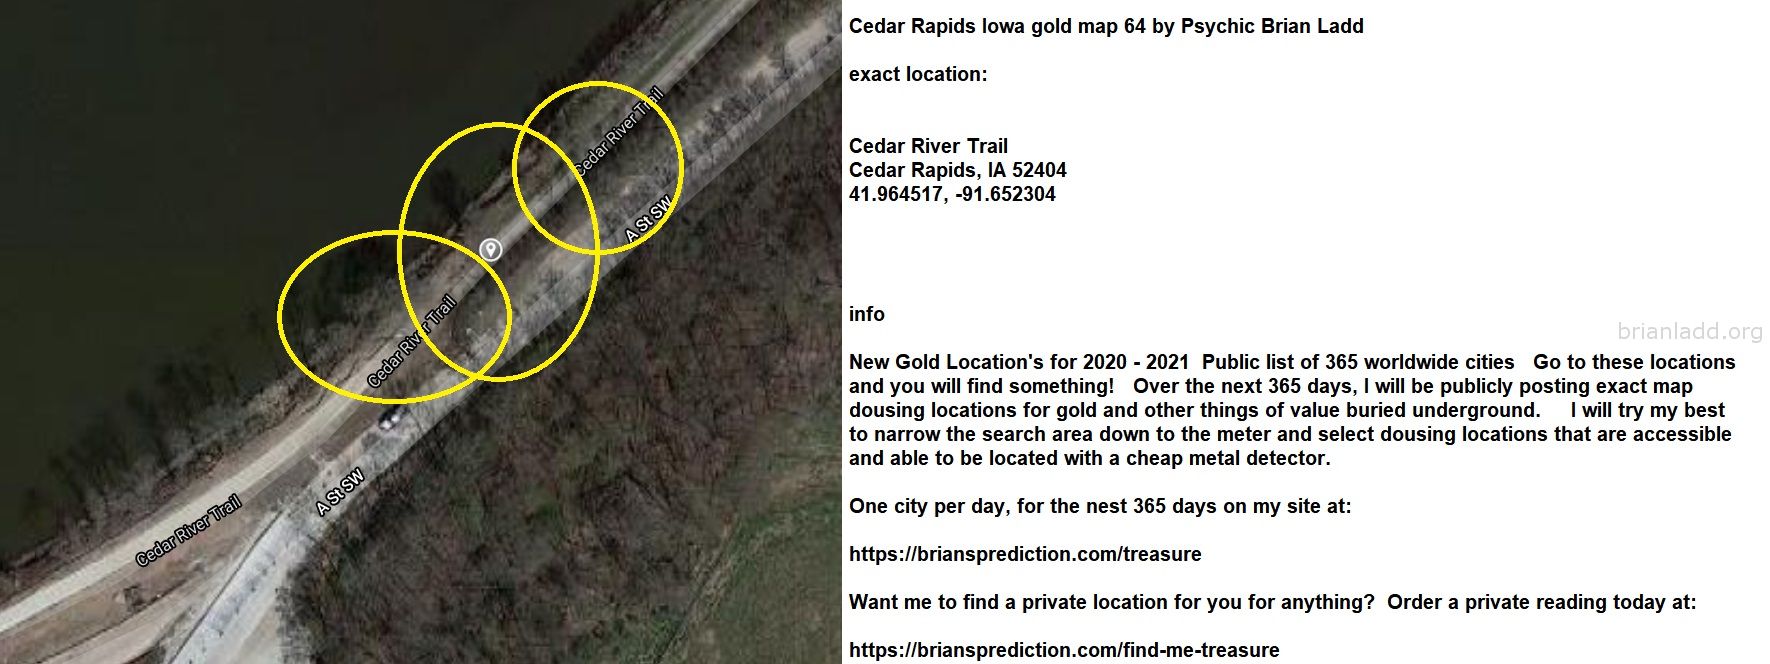 Cedar Rapids Iowa Gold Map 64 By Psychic Brian Ladd - Cedar Rapids Iowa Gold Map 64 By Psychic Brian Ladd  Exact Locatio...
Cedar Rapids Iowa Gold Map 64 By Psychic Brian Ladd  Exact Location:  Cedar River Trail  Cedar Rapids, Ia 52404  41.964517, -91.652304  Info  New Gold Location'S For 2020 - 2021  Public List Of 365 Worldwide Cities  Go To These Locations And You Will Find Something!  Over The Next 365 Days, I Will Be Publicly Posting Exact Map Dousing Locations For Gold And Other Things Of Value Buried Underground.  I Will Try My Best To Narrow The Search Area Down To The Meter And Select Dousing Locations That Are Accessible And Able To Be Located With A Cheap Metal Detector.  One City Per Day, For The Nest 365 Days On My Site At:   https://briansprediction.com/Treasure  Want Me To Find A Private Location For You For Anything?  Order A Private Reading Today At:   https://briansprediction.com/Find-Me-Treasure
